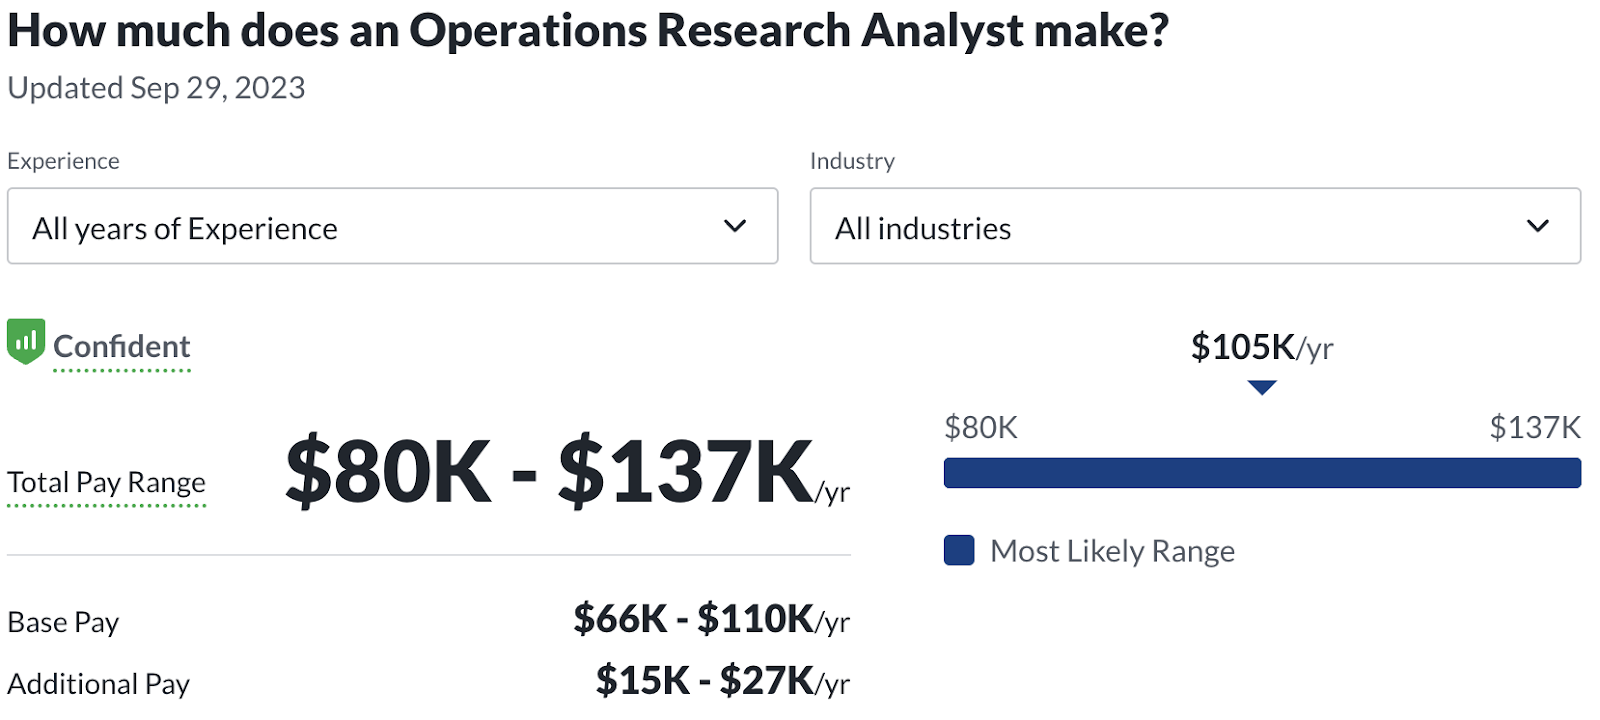 operations research analyst salary: a job with mathematics degree